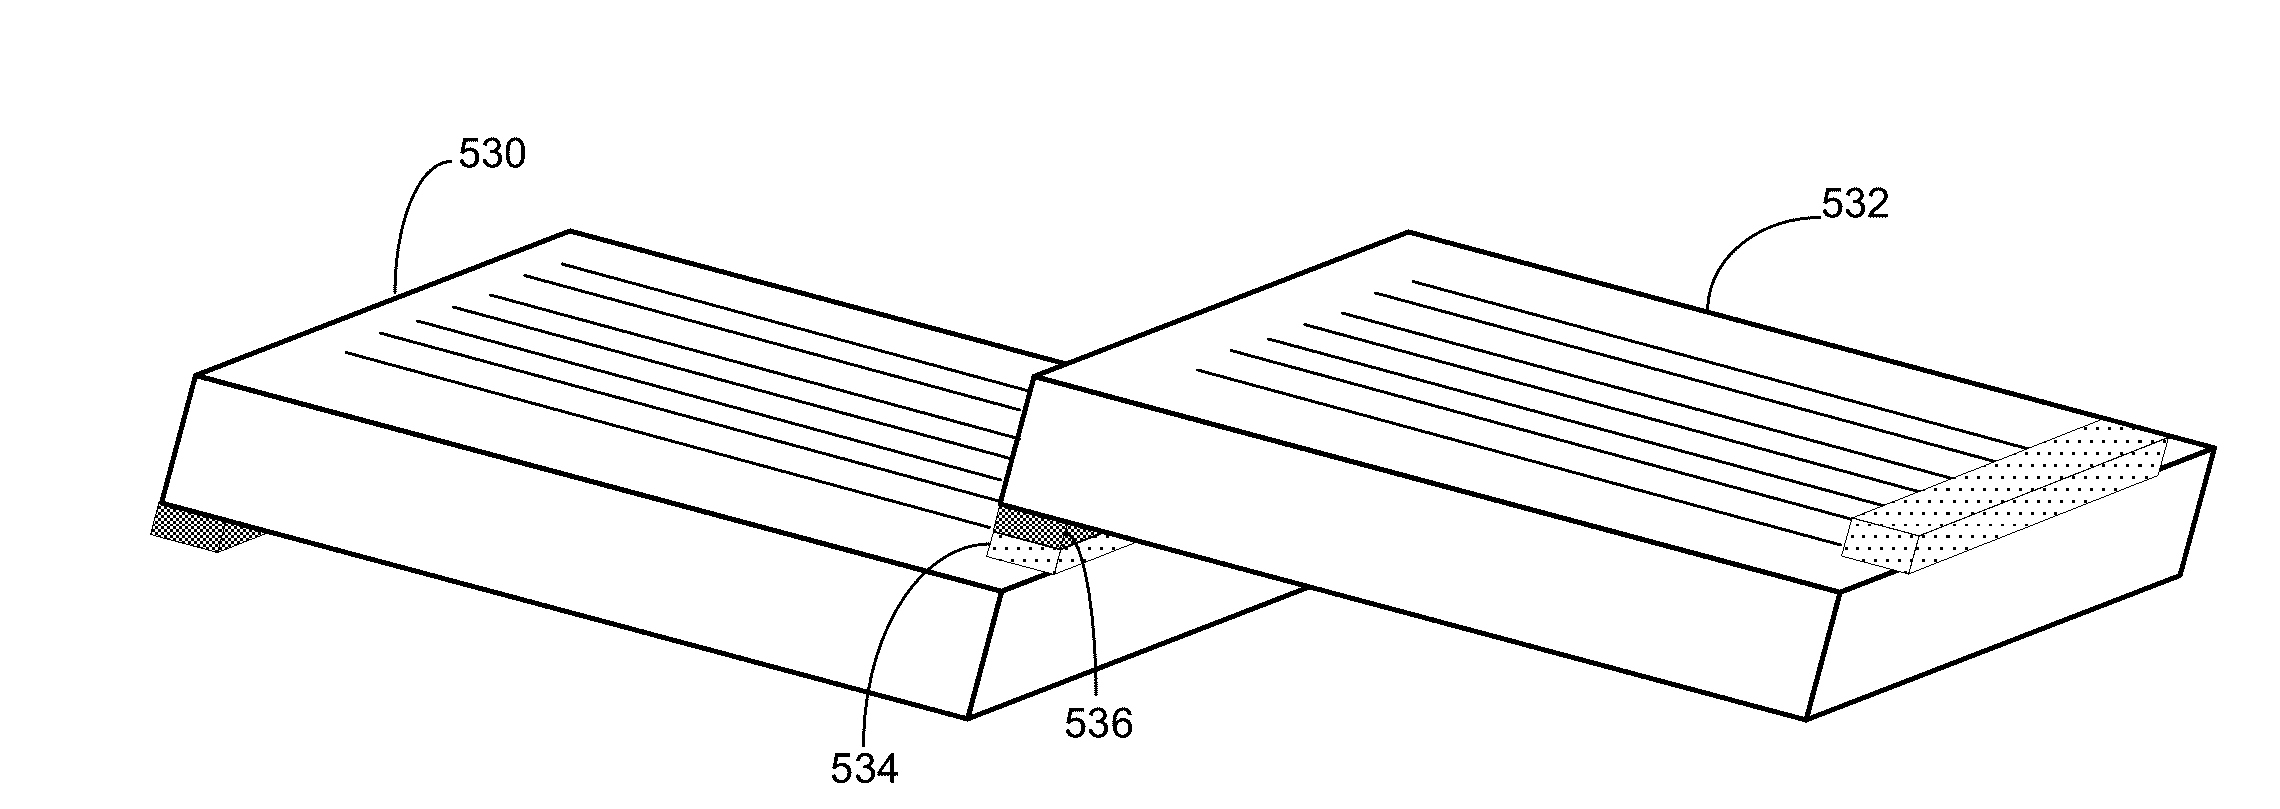 Module fabrication of solar cells with low resistivity electrodes